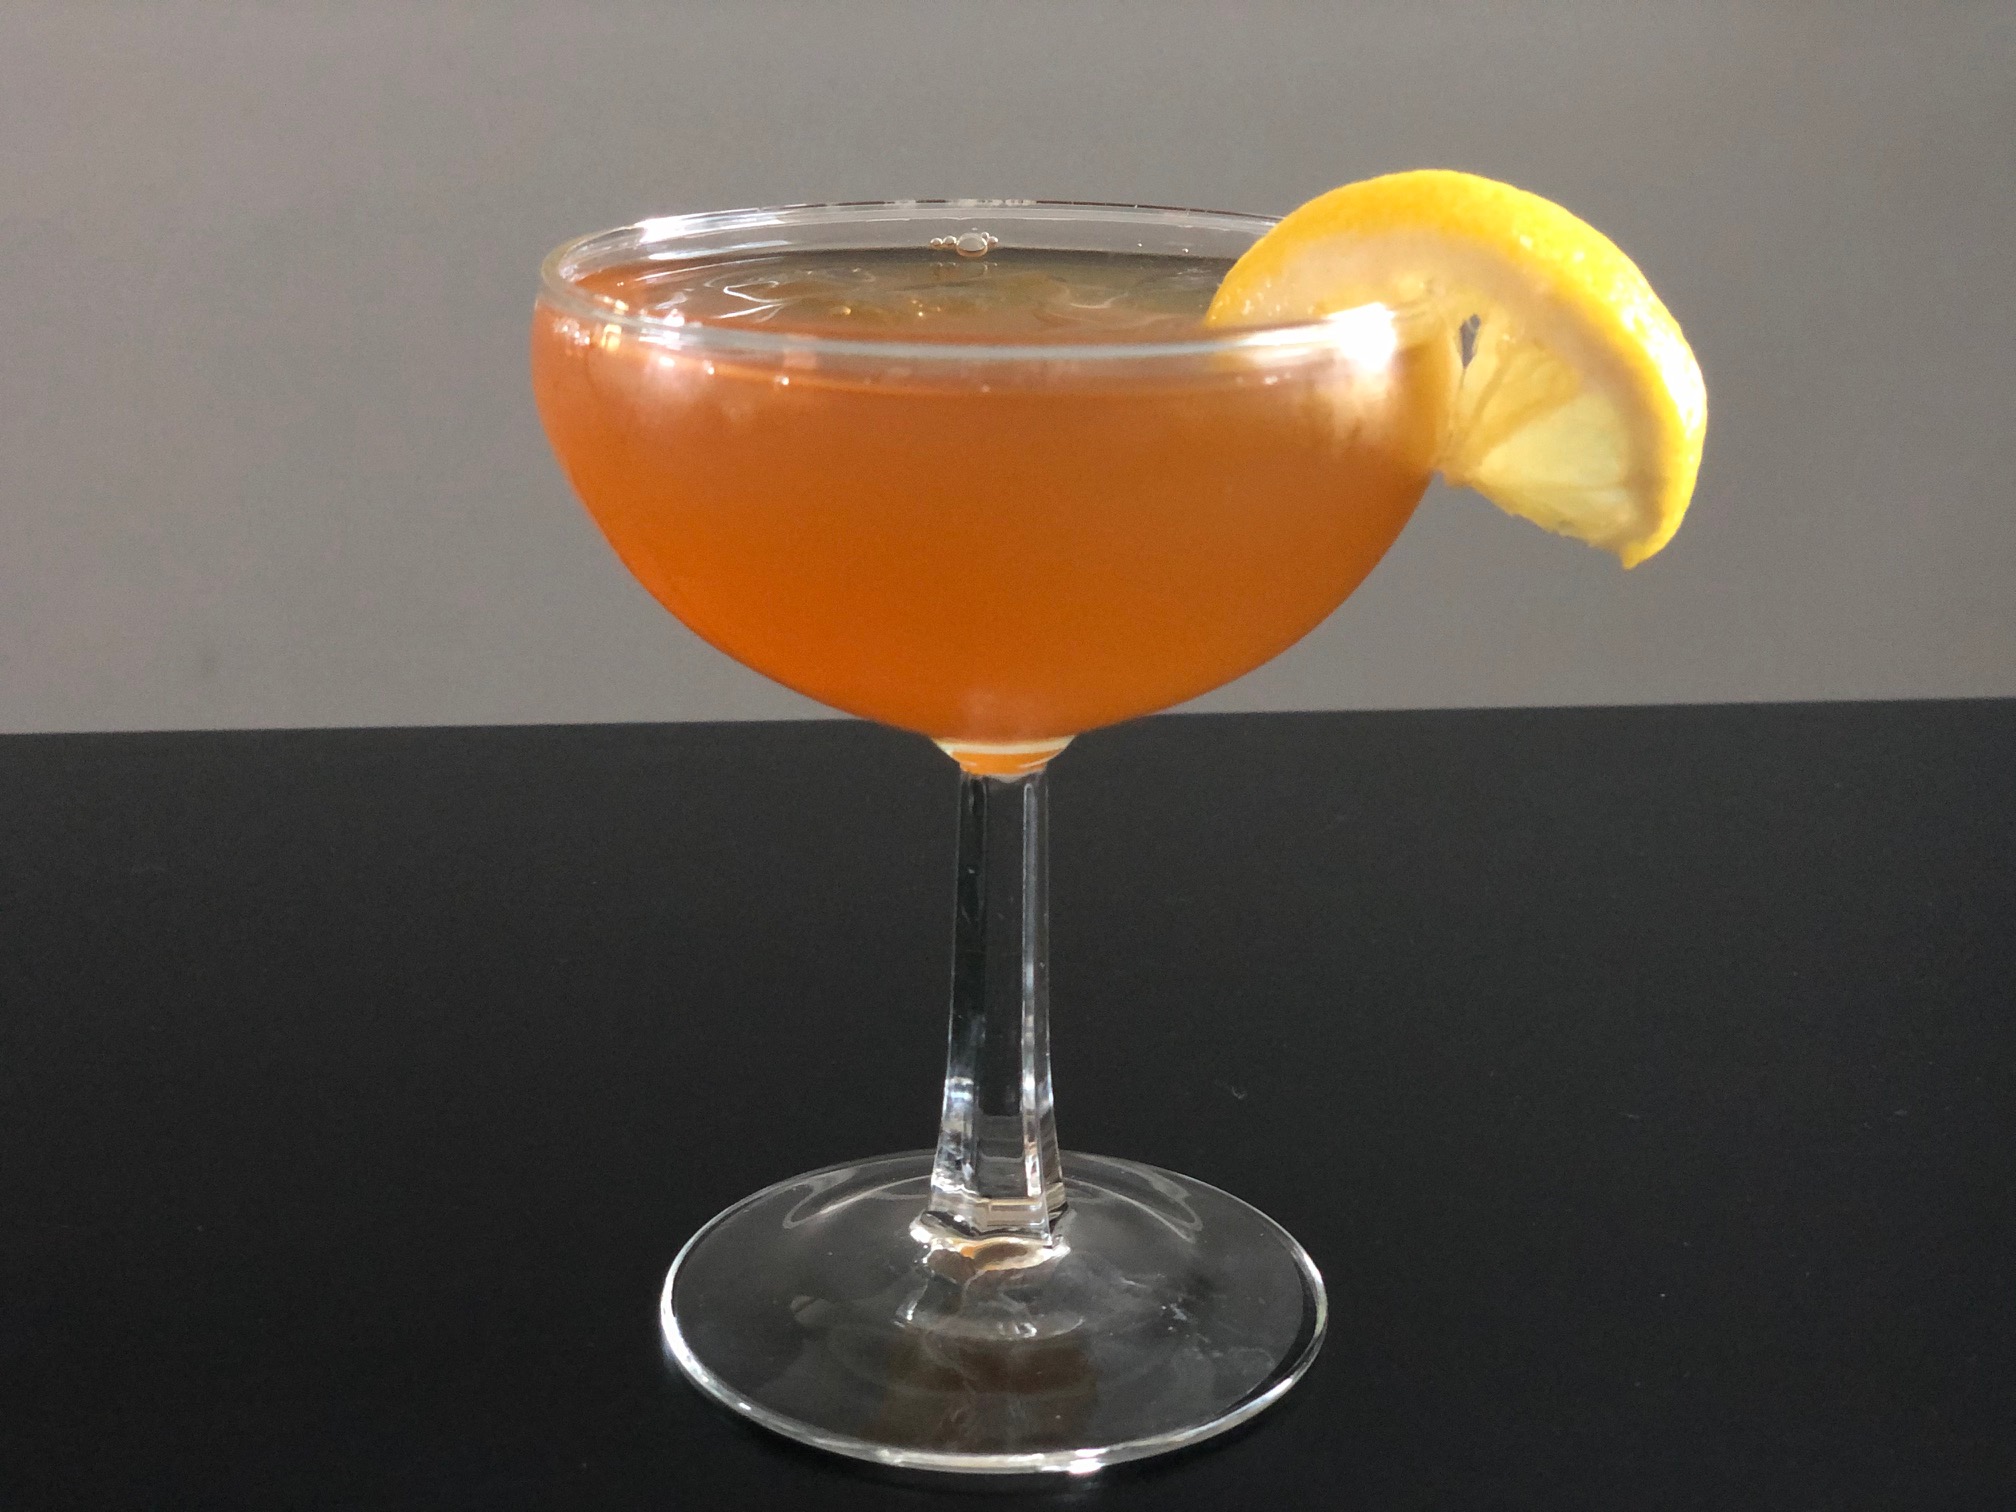 An orange cocktail in a coupe glass on a black table has a lemon garnish. Photo by Alyssa Buckley.